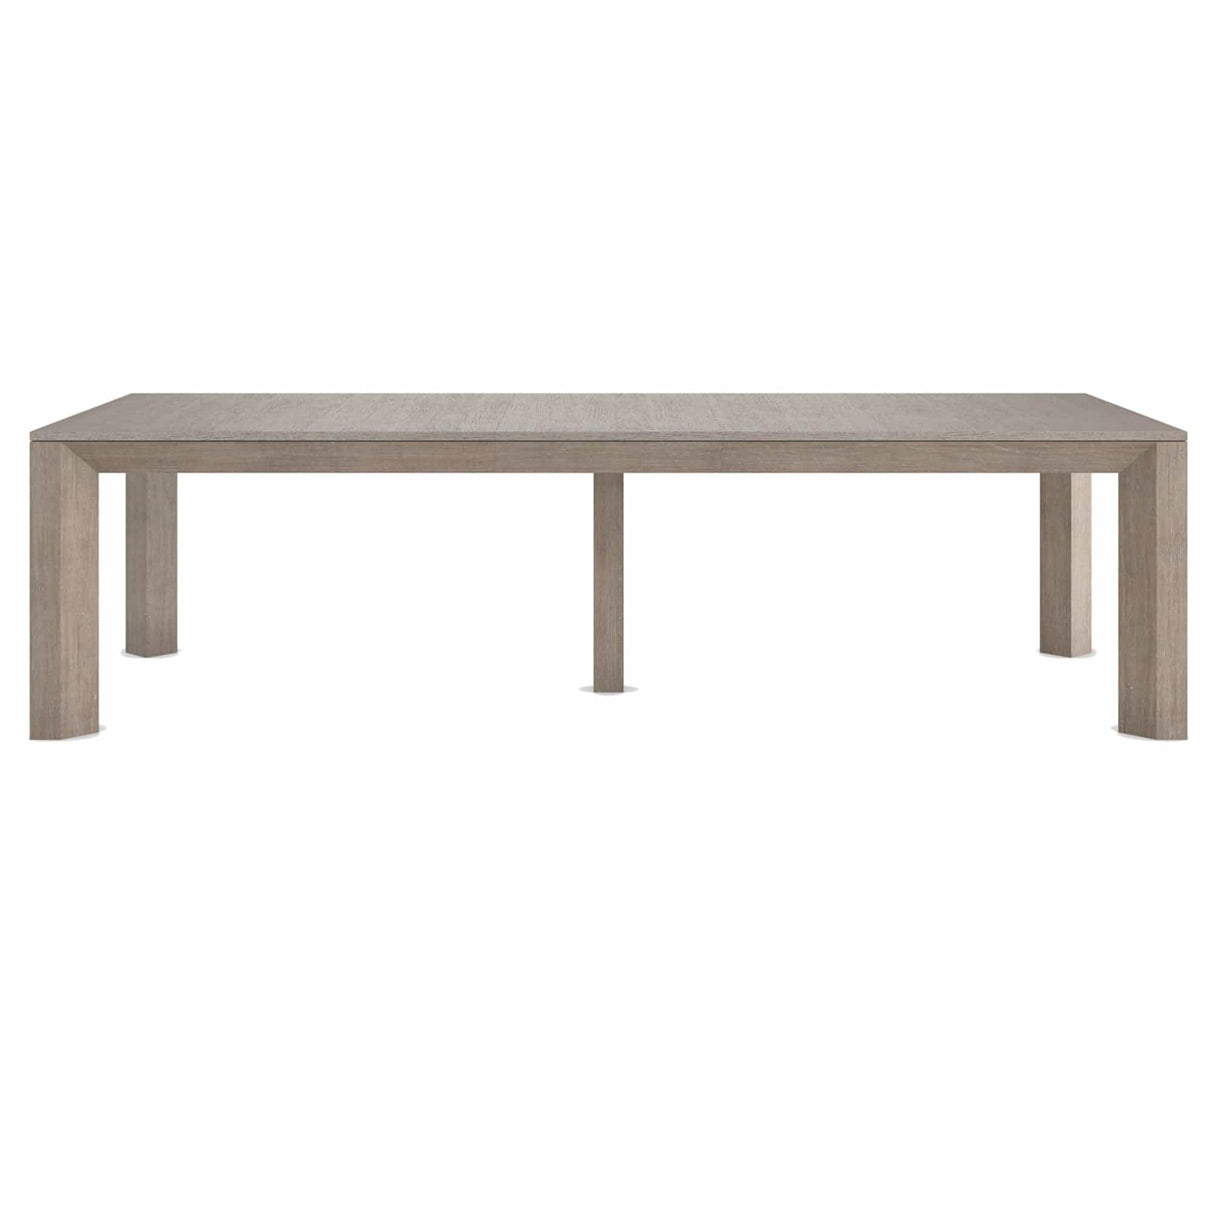 Caracole Low Country Dining Table Dining Tables caracole-CLA-423-203 662896045031